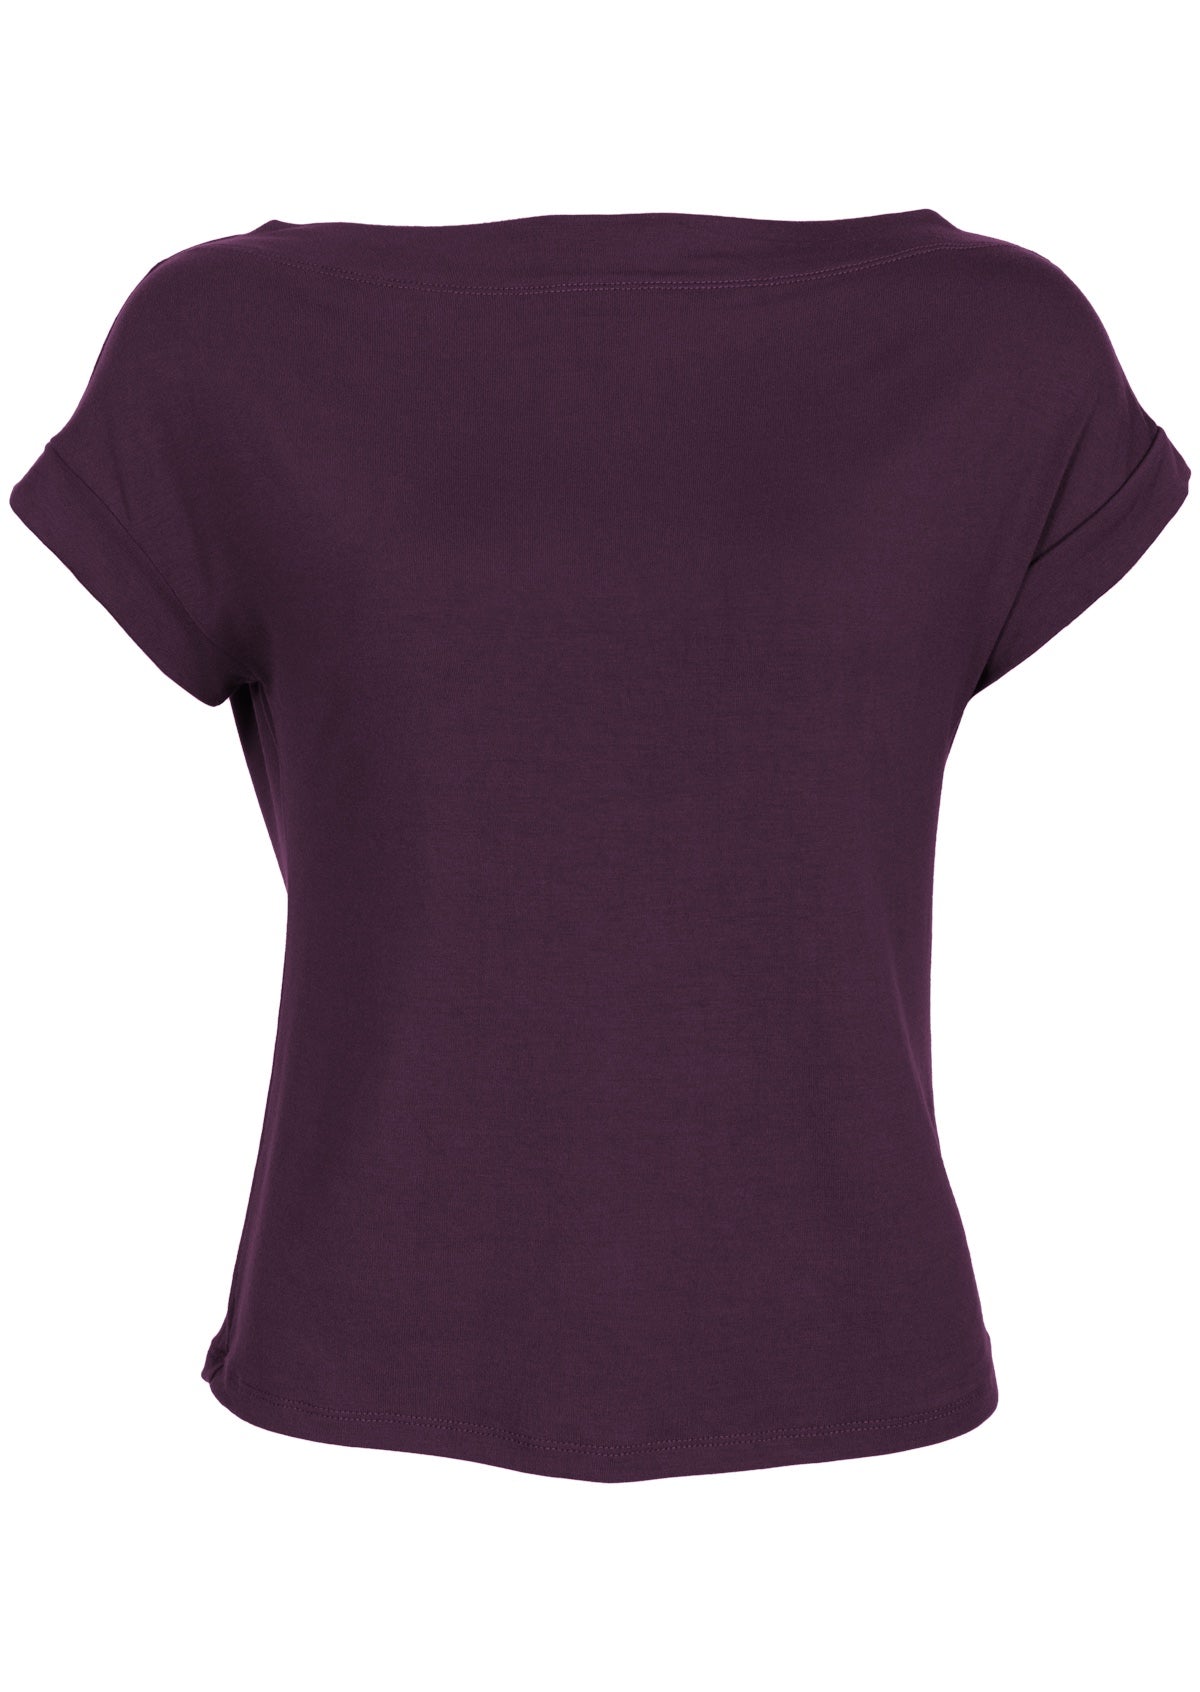 Front view of women's wide neck mod purple stretch rayon boat neck top